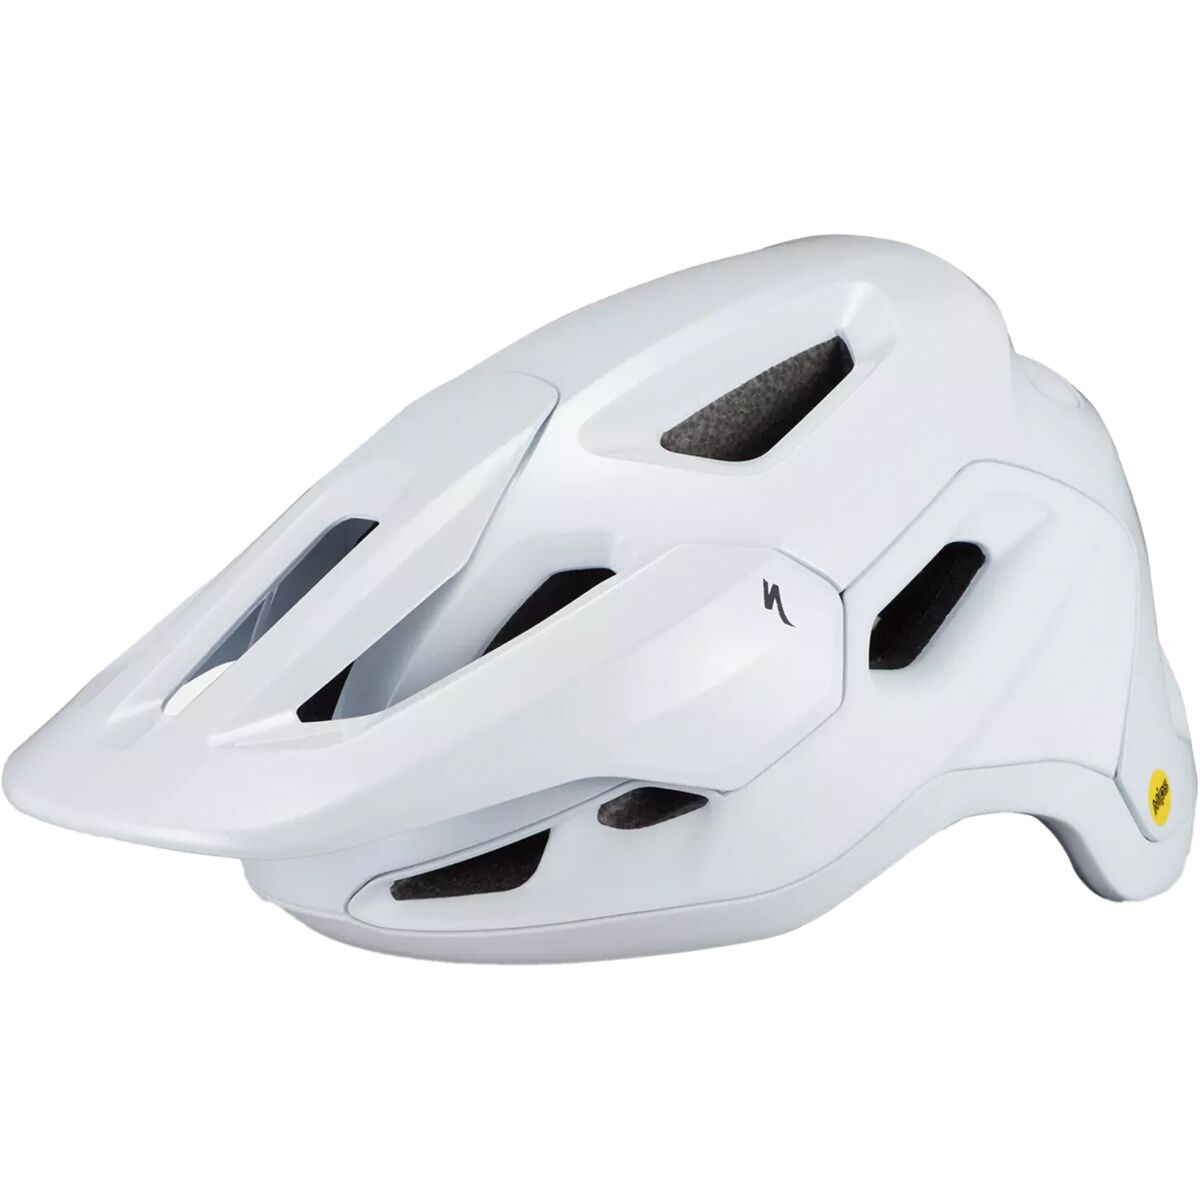 Specialized Tactic 4 Mips Round Fit Helmet White, S